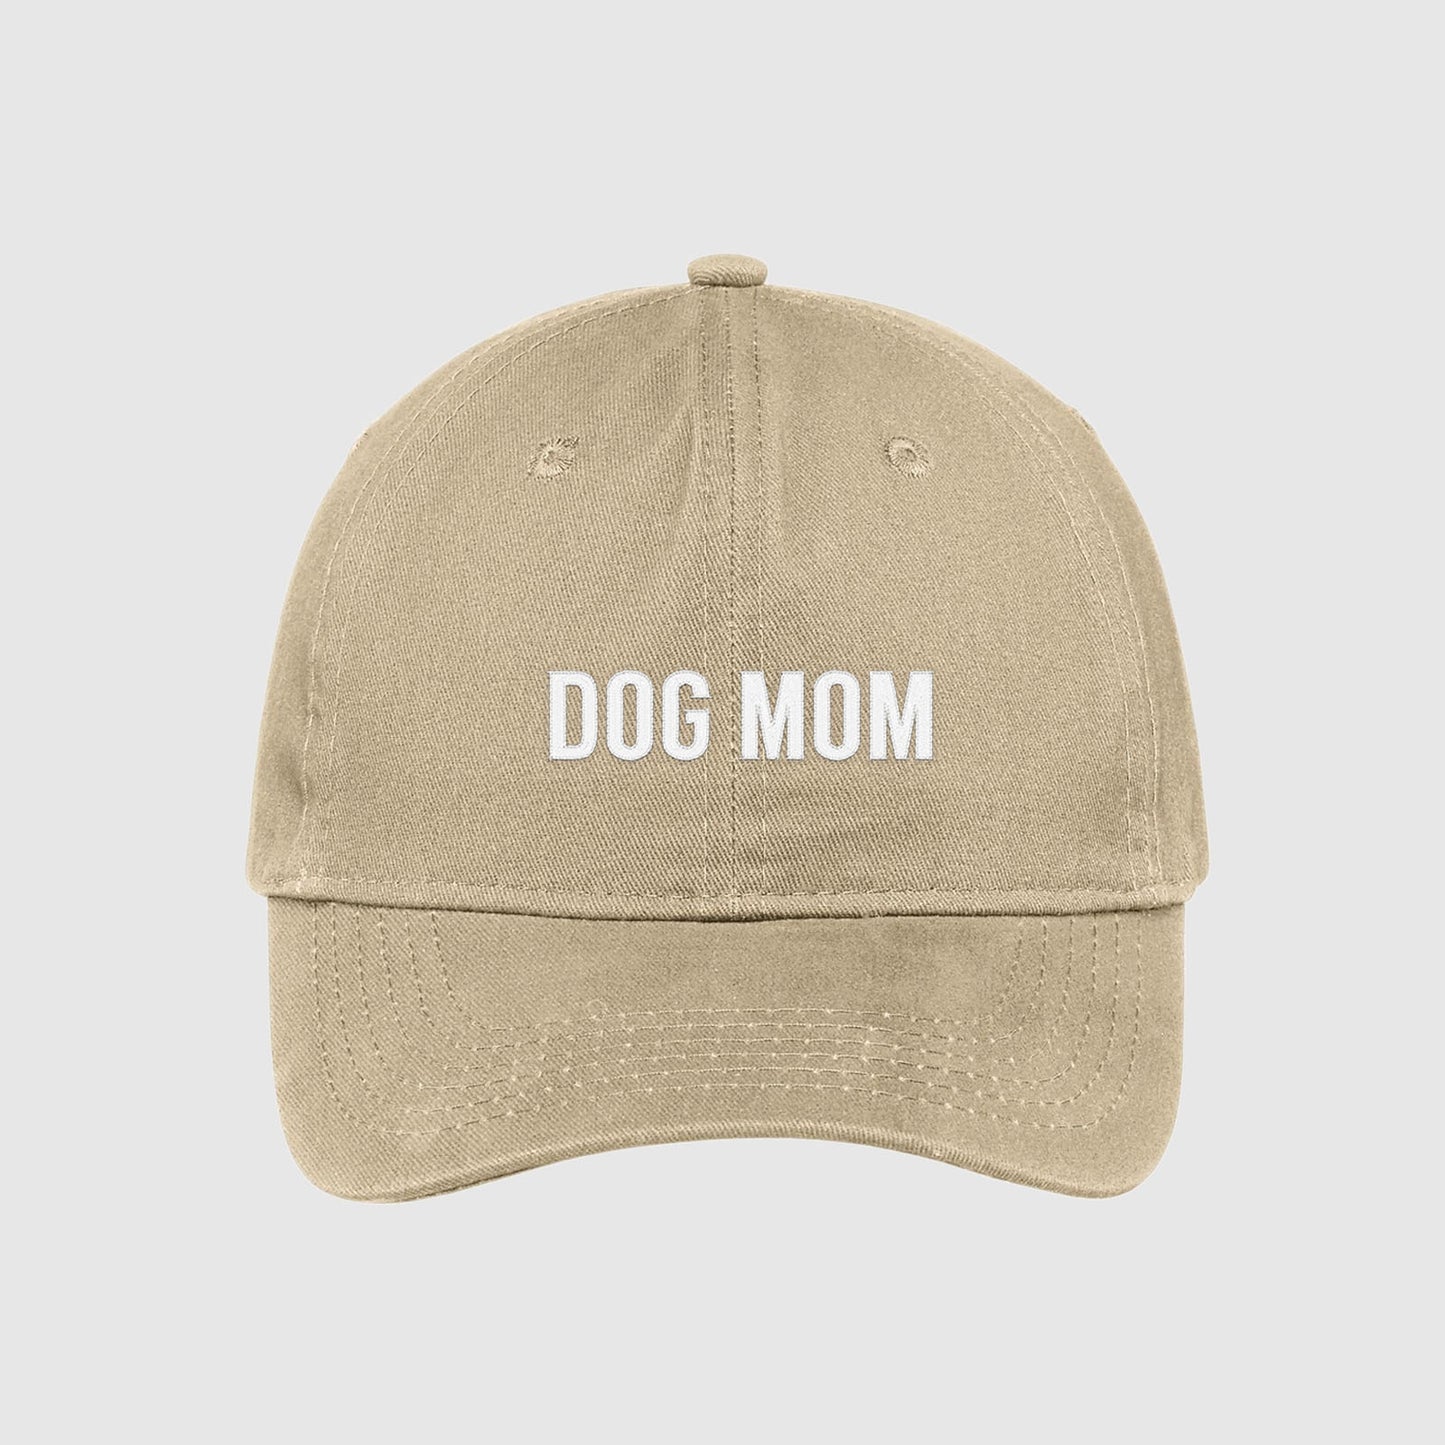 Tan Dog Mom Hat embroidered with white text.